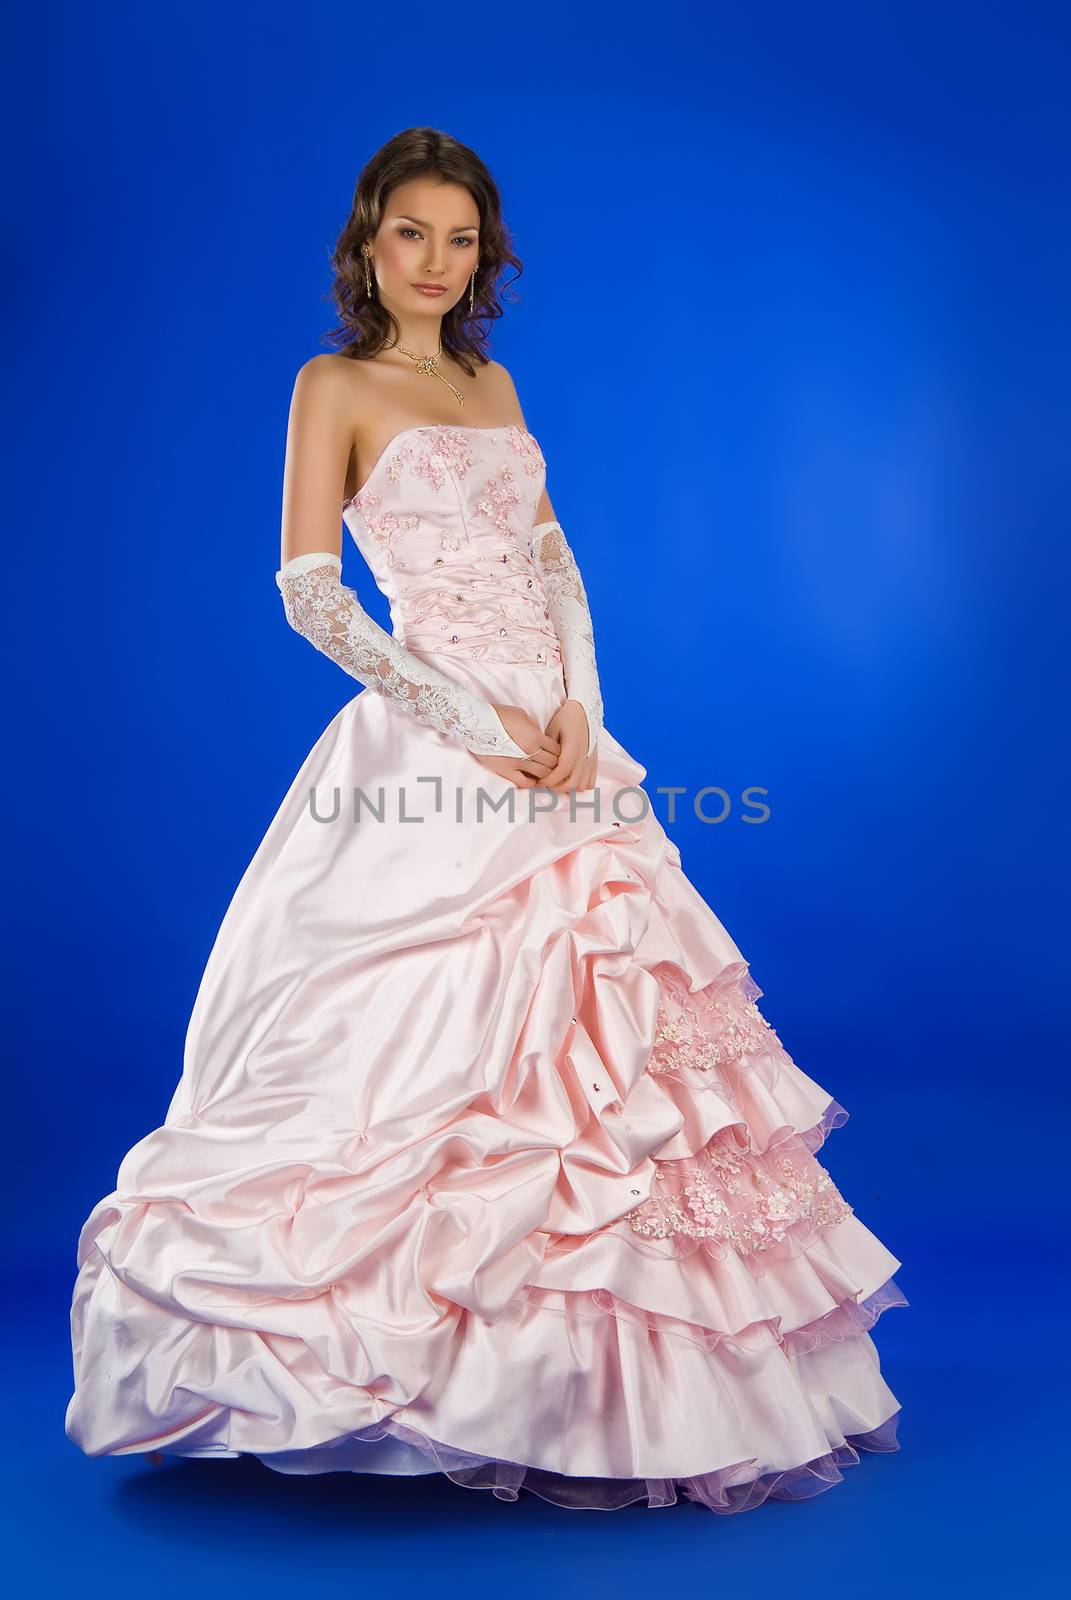 Young beautiful women in wedding dresses on a studio background